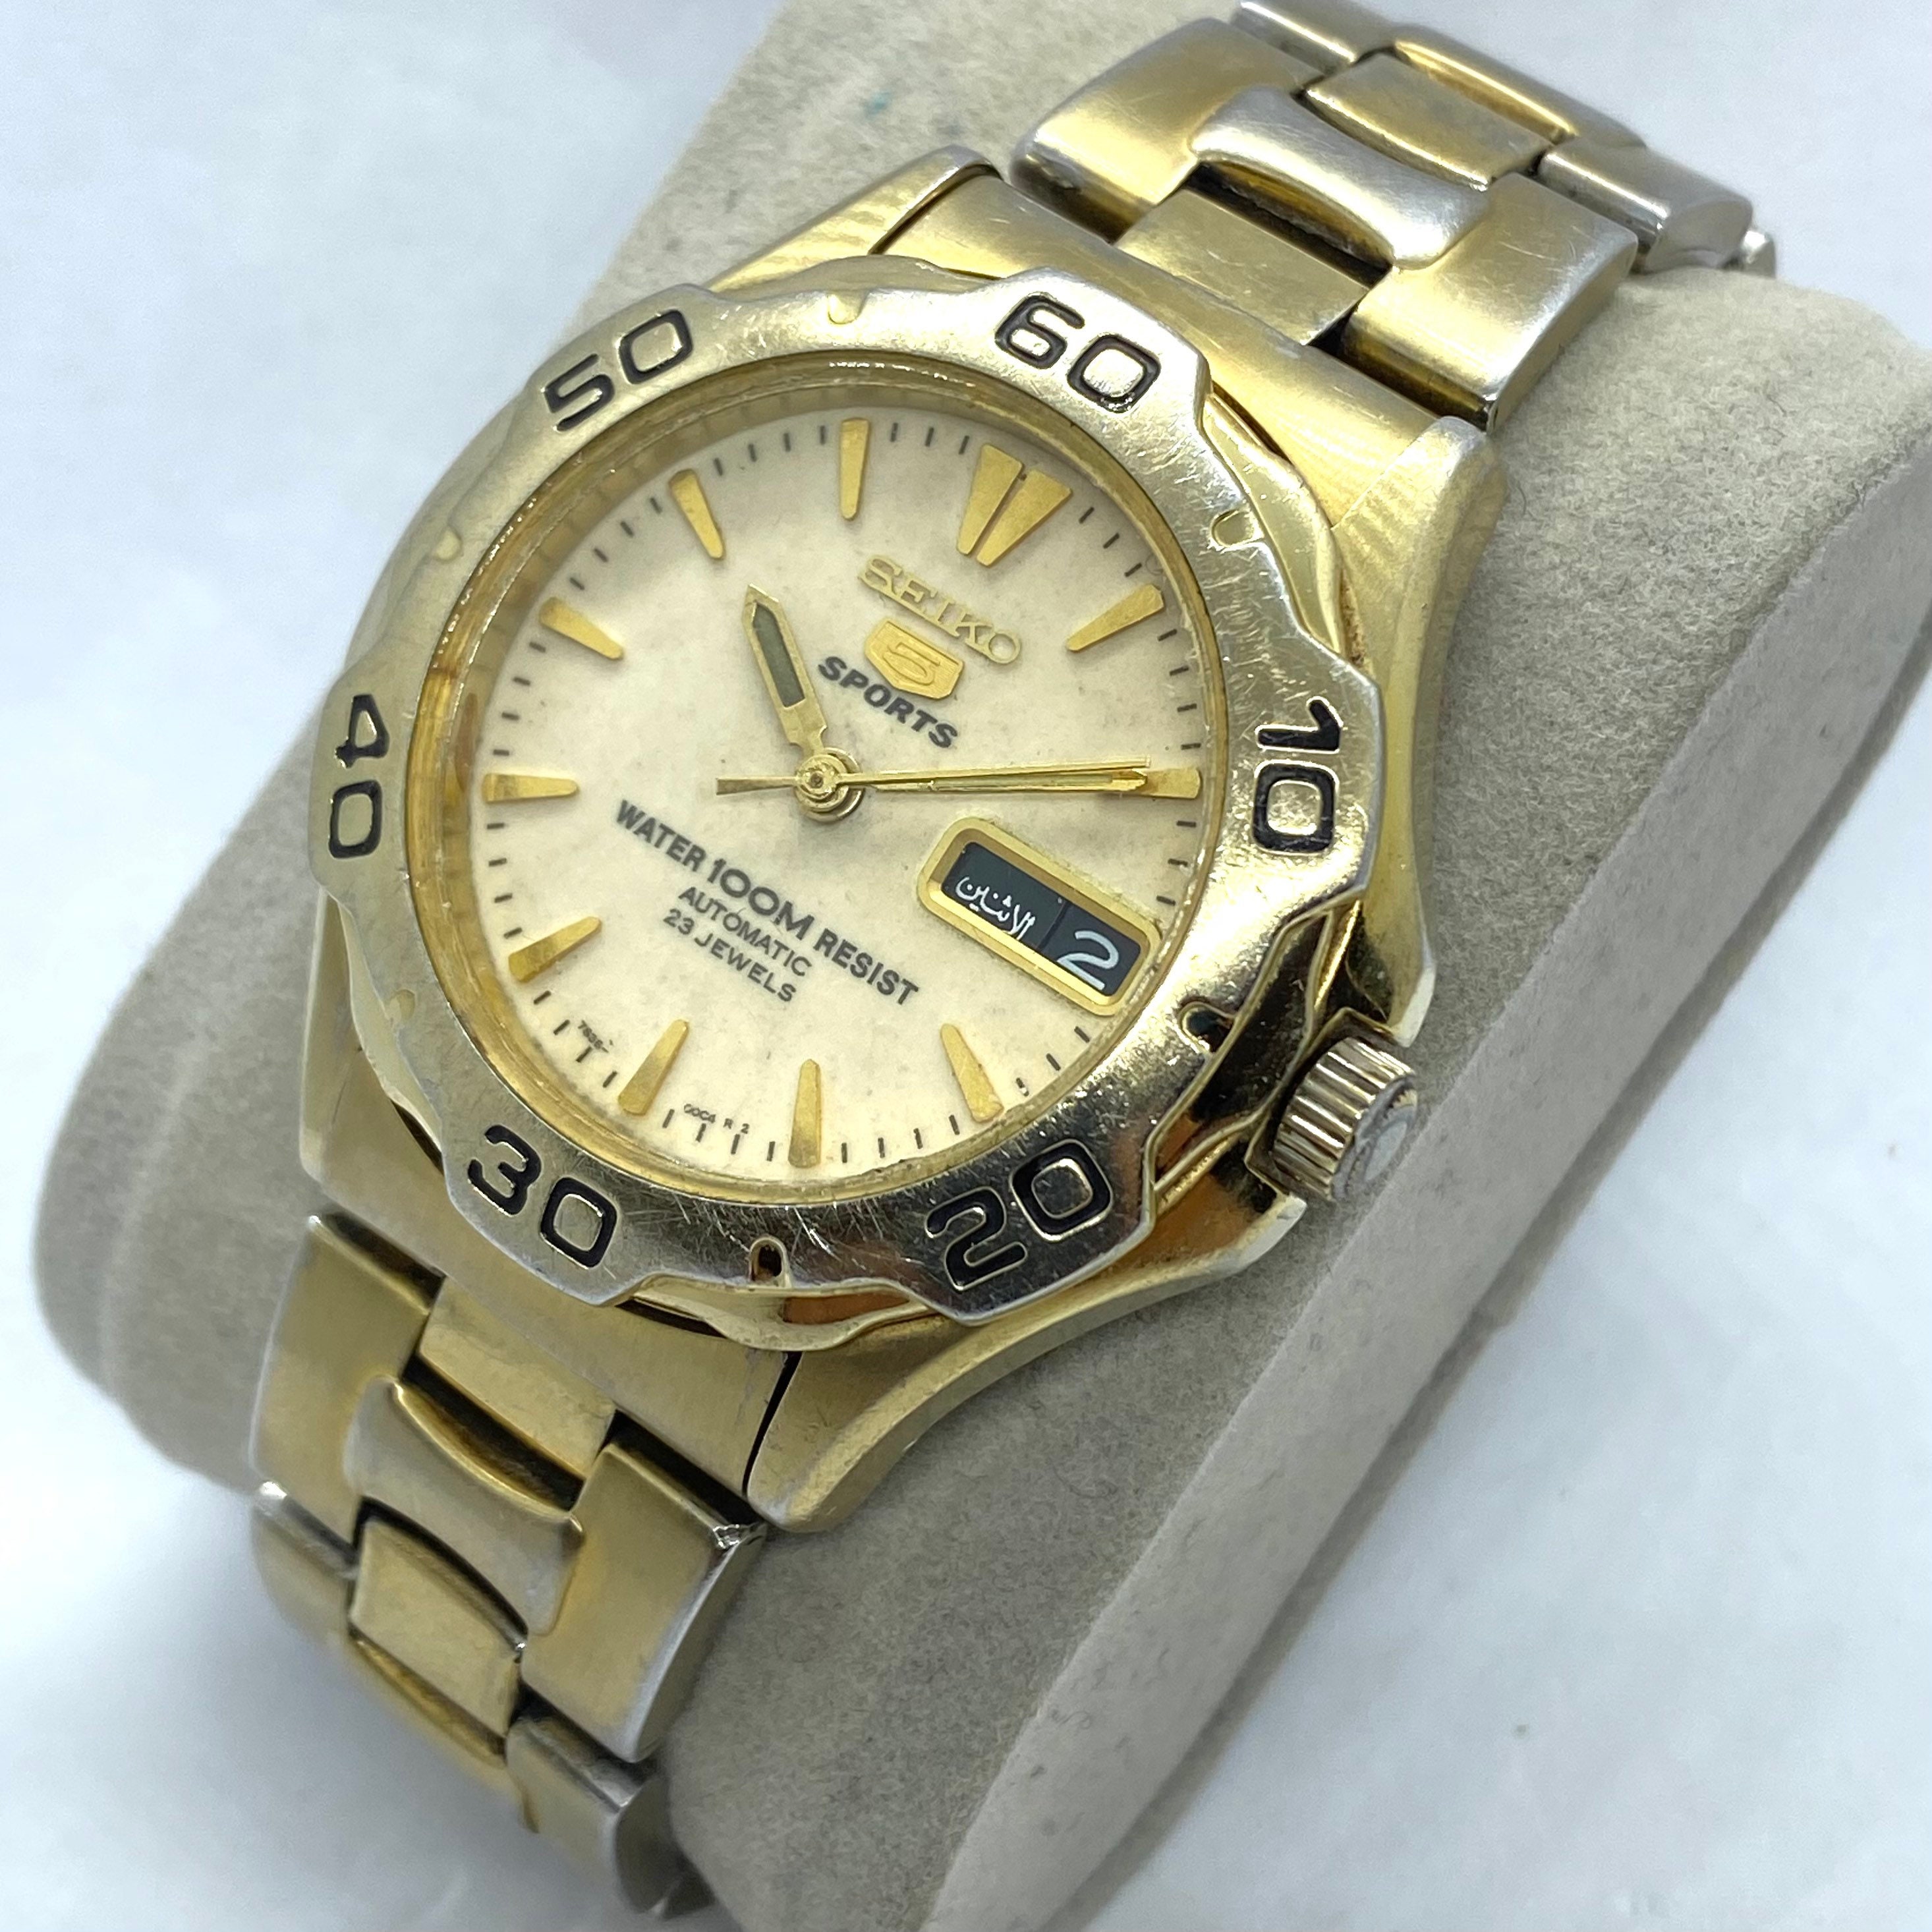 Seiko 5 Sports Automatic Vintage Watch Men's Water 100M - Etsy